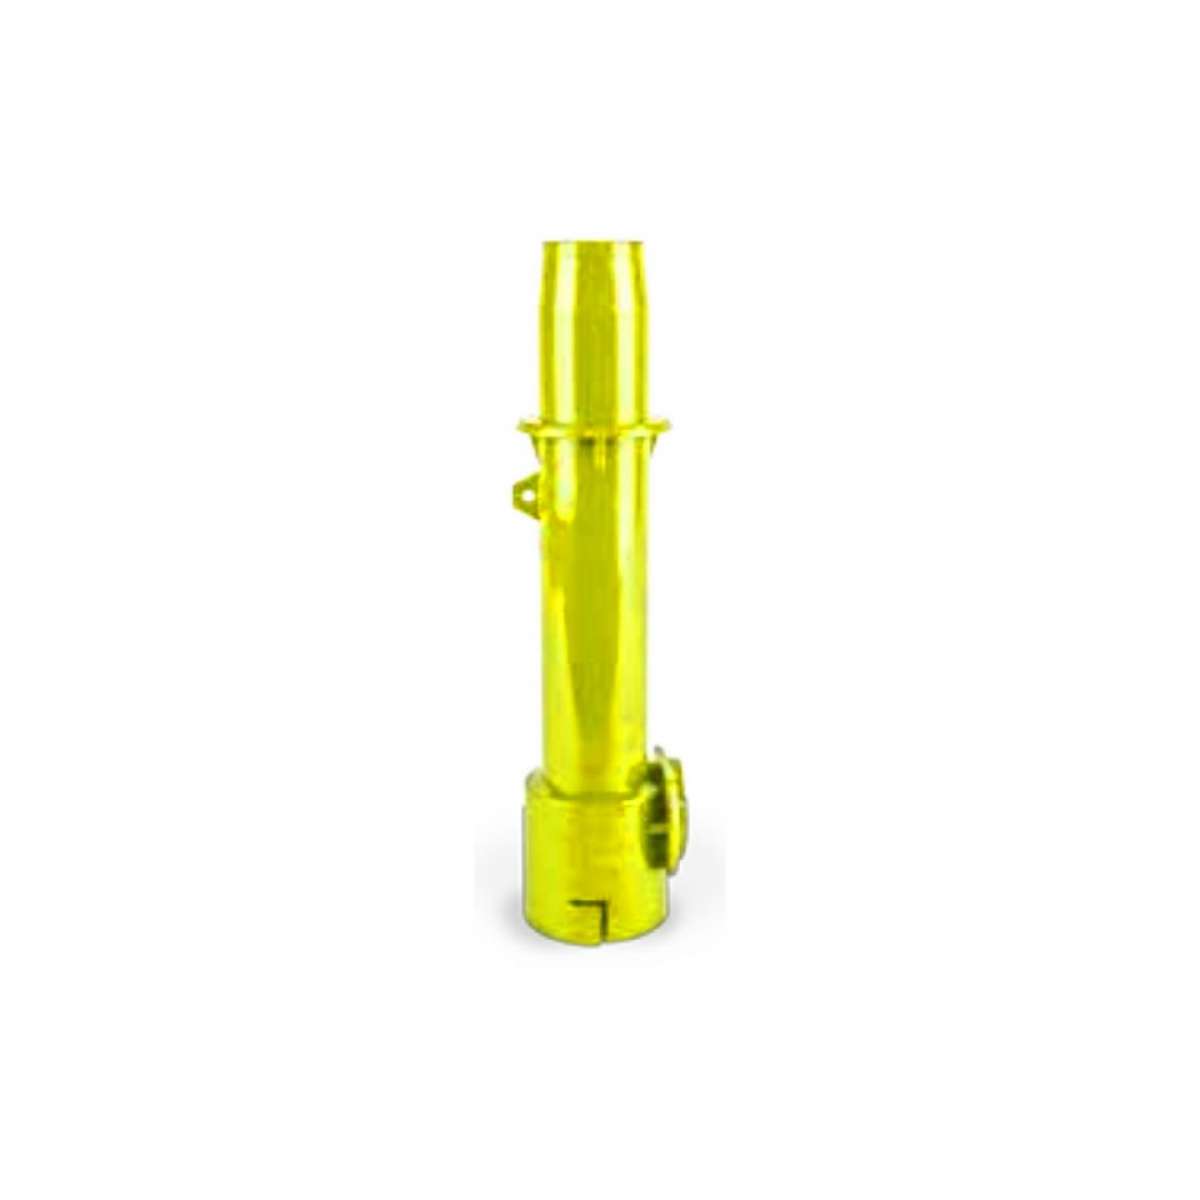 IsoLink 8" Rigid Spout with 1" Tip - Yellow